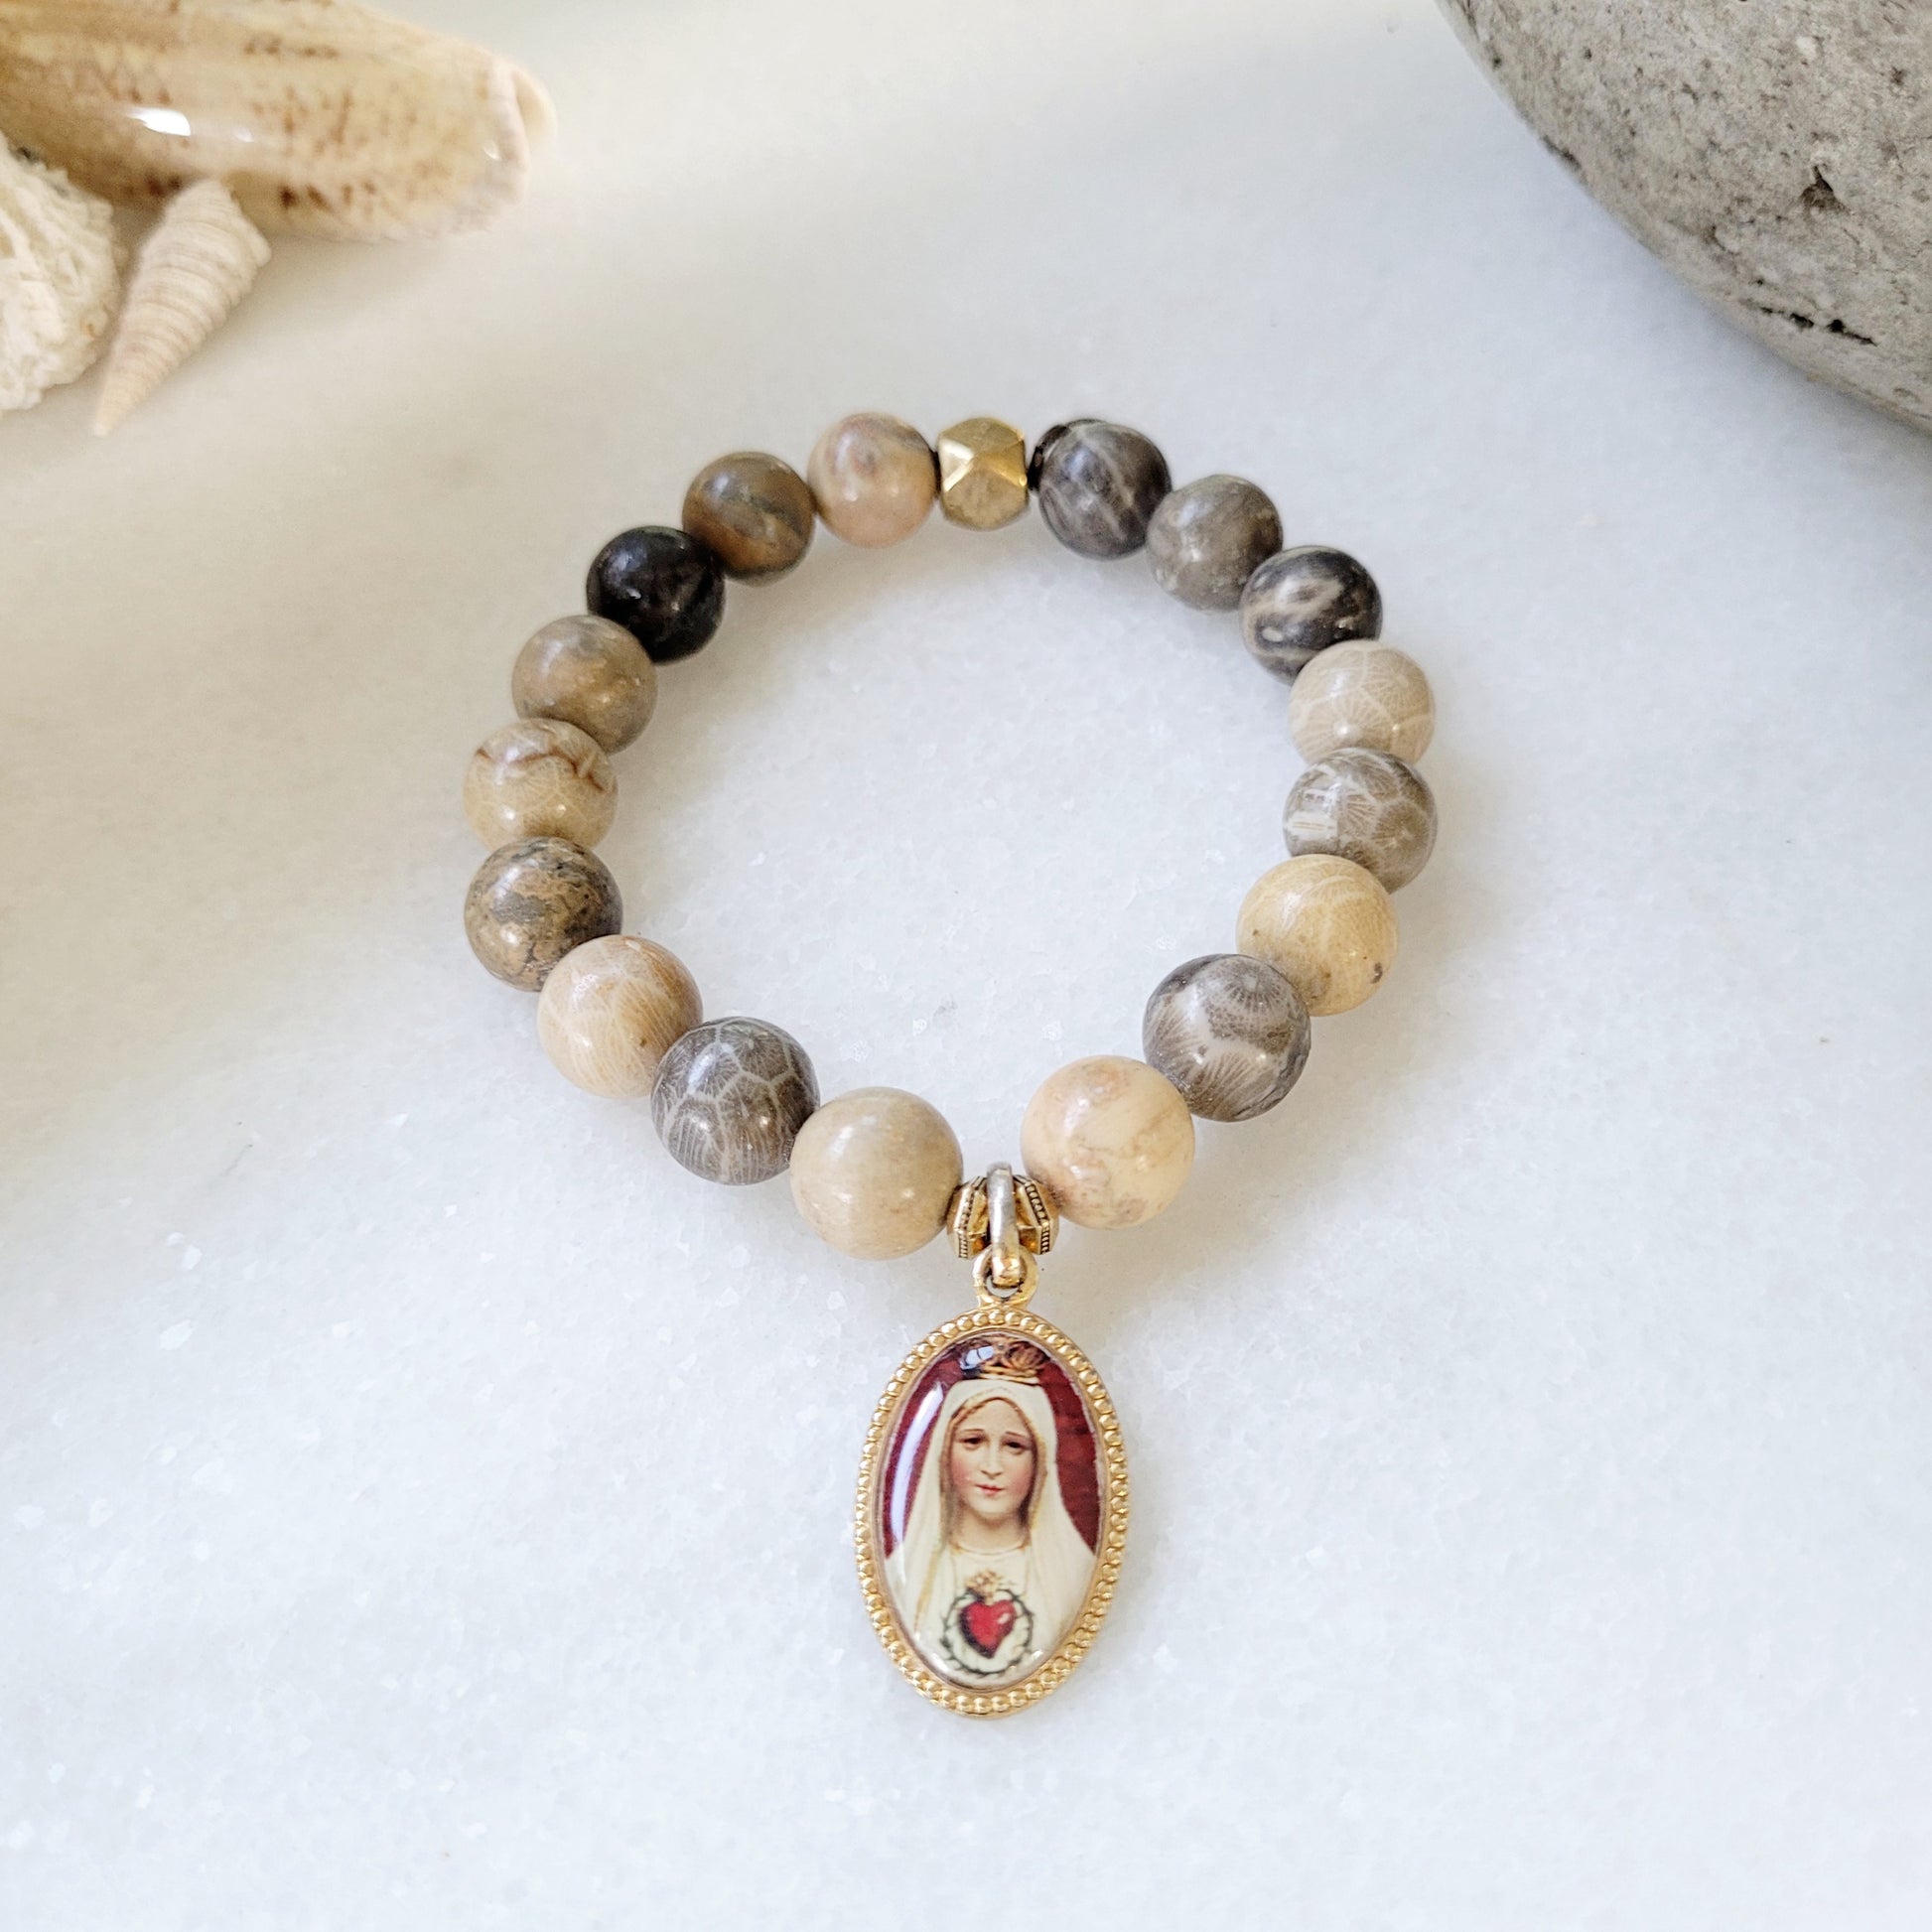 Jasper 10mm Beaded Bracelet w/ Our Lady of Fatima Gold-plated Medal - Afterlife Jewelry Designs